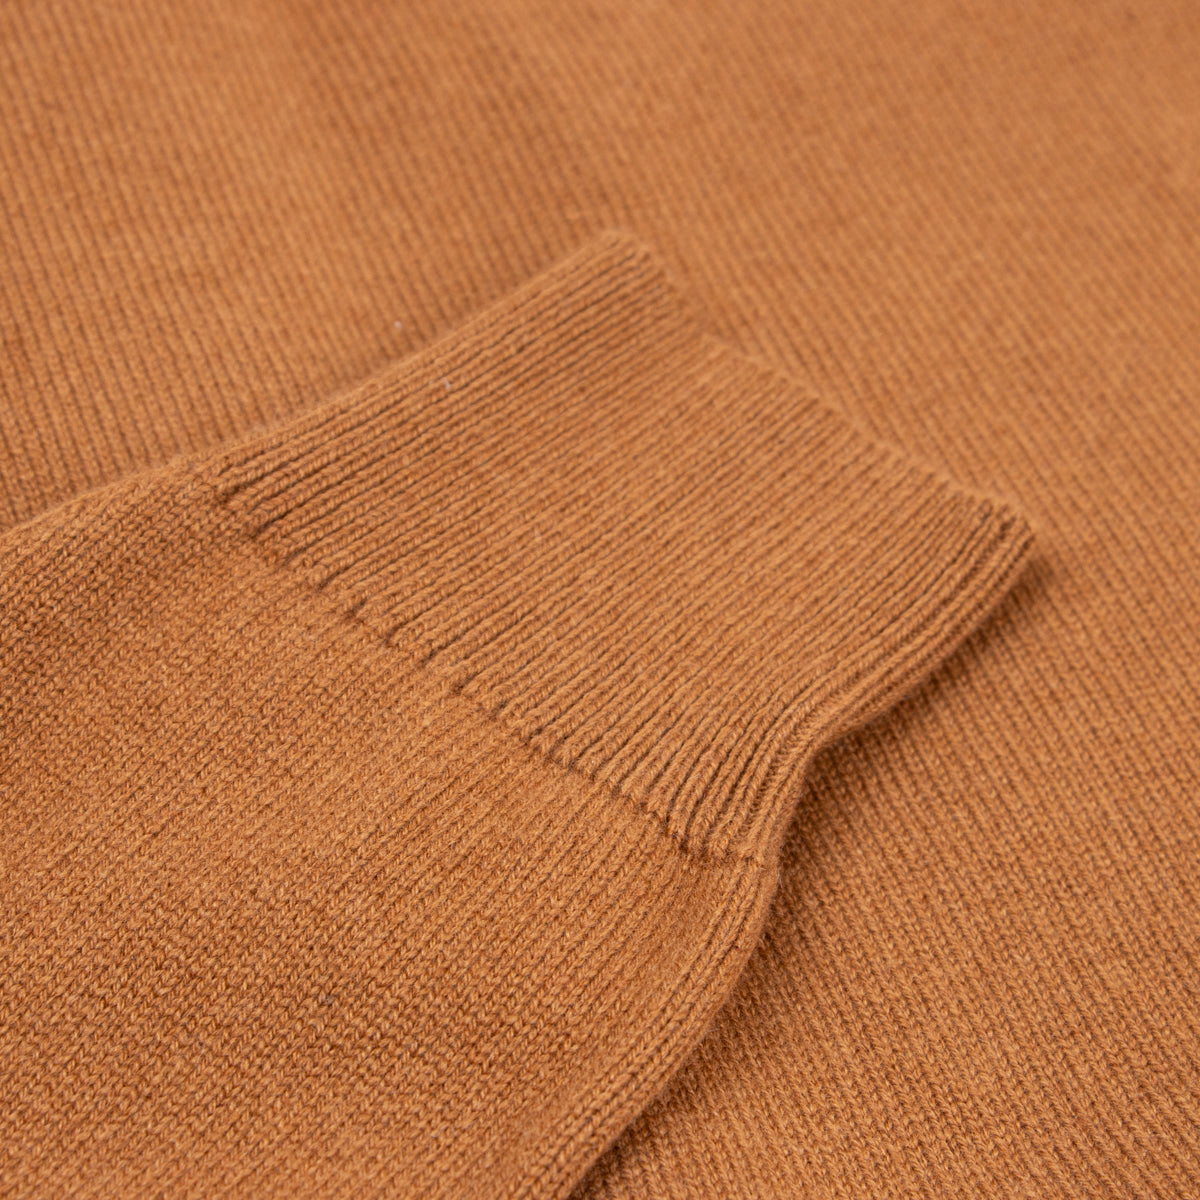 Vintage Vicuna Mallaig 4ply Cashmere Cardigan  Robert Old   